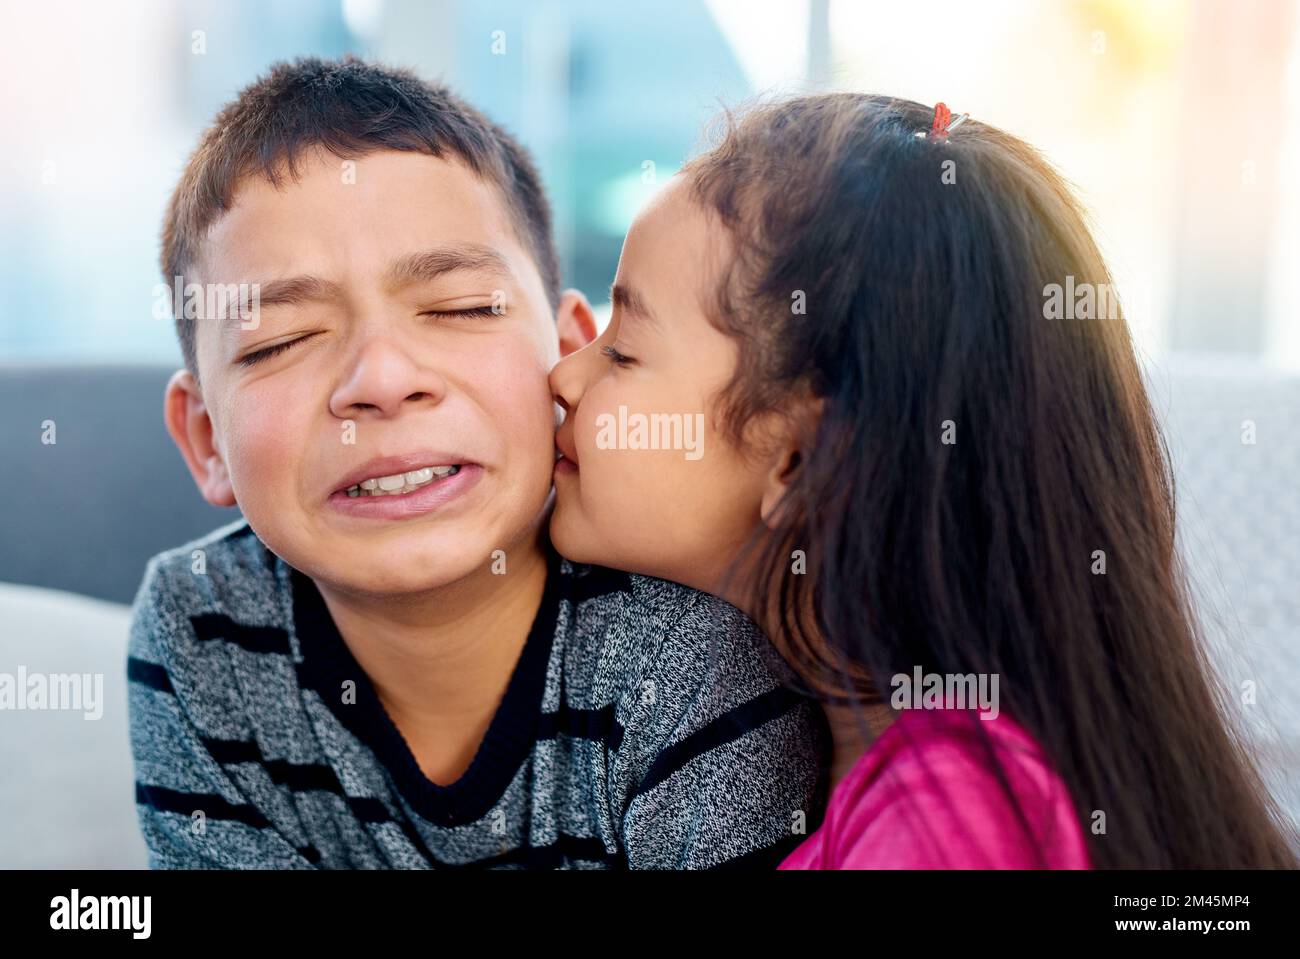 First kiss nerves. an adorable little girl kissing her big brother on the cheek at home. Stock Photo